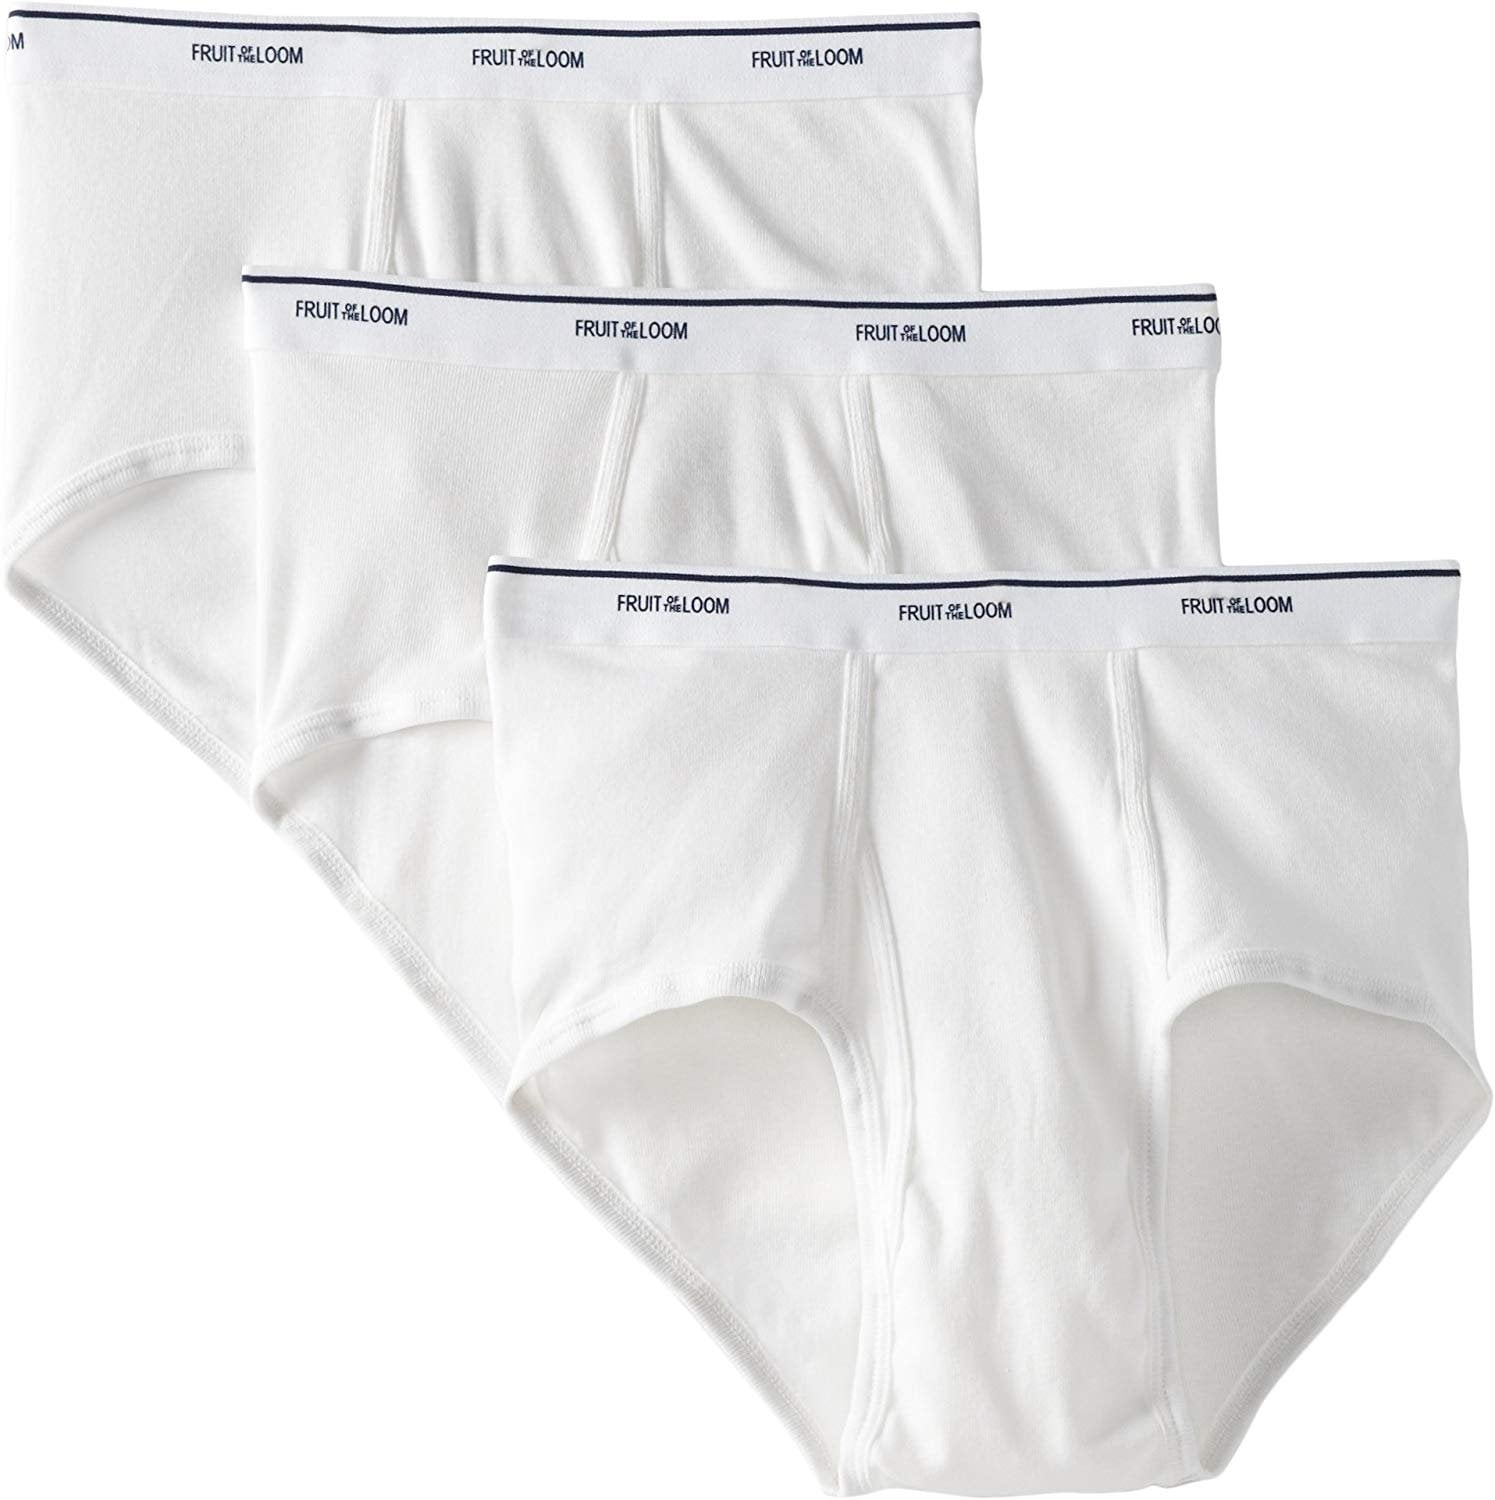 Fruit of the Loom Men's 100% Cotton Tagr Free White Classic Briefs